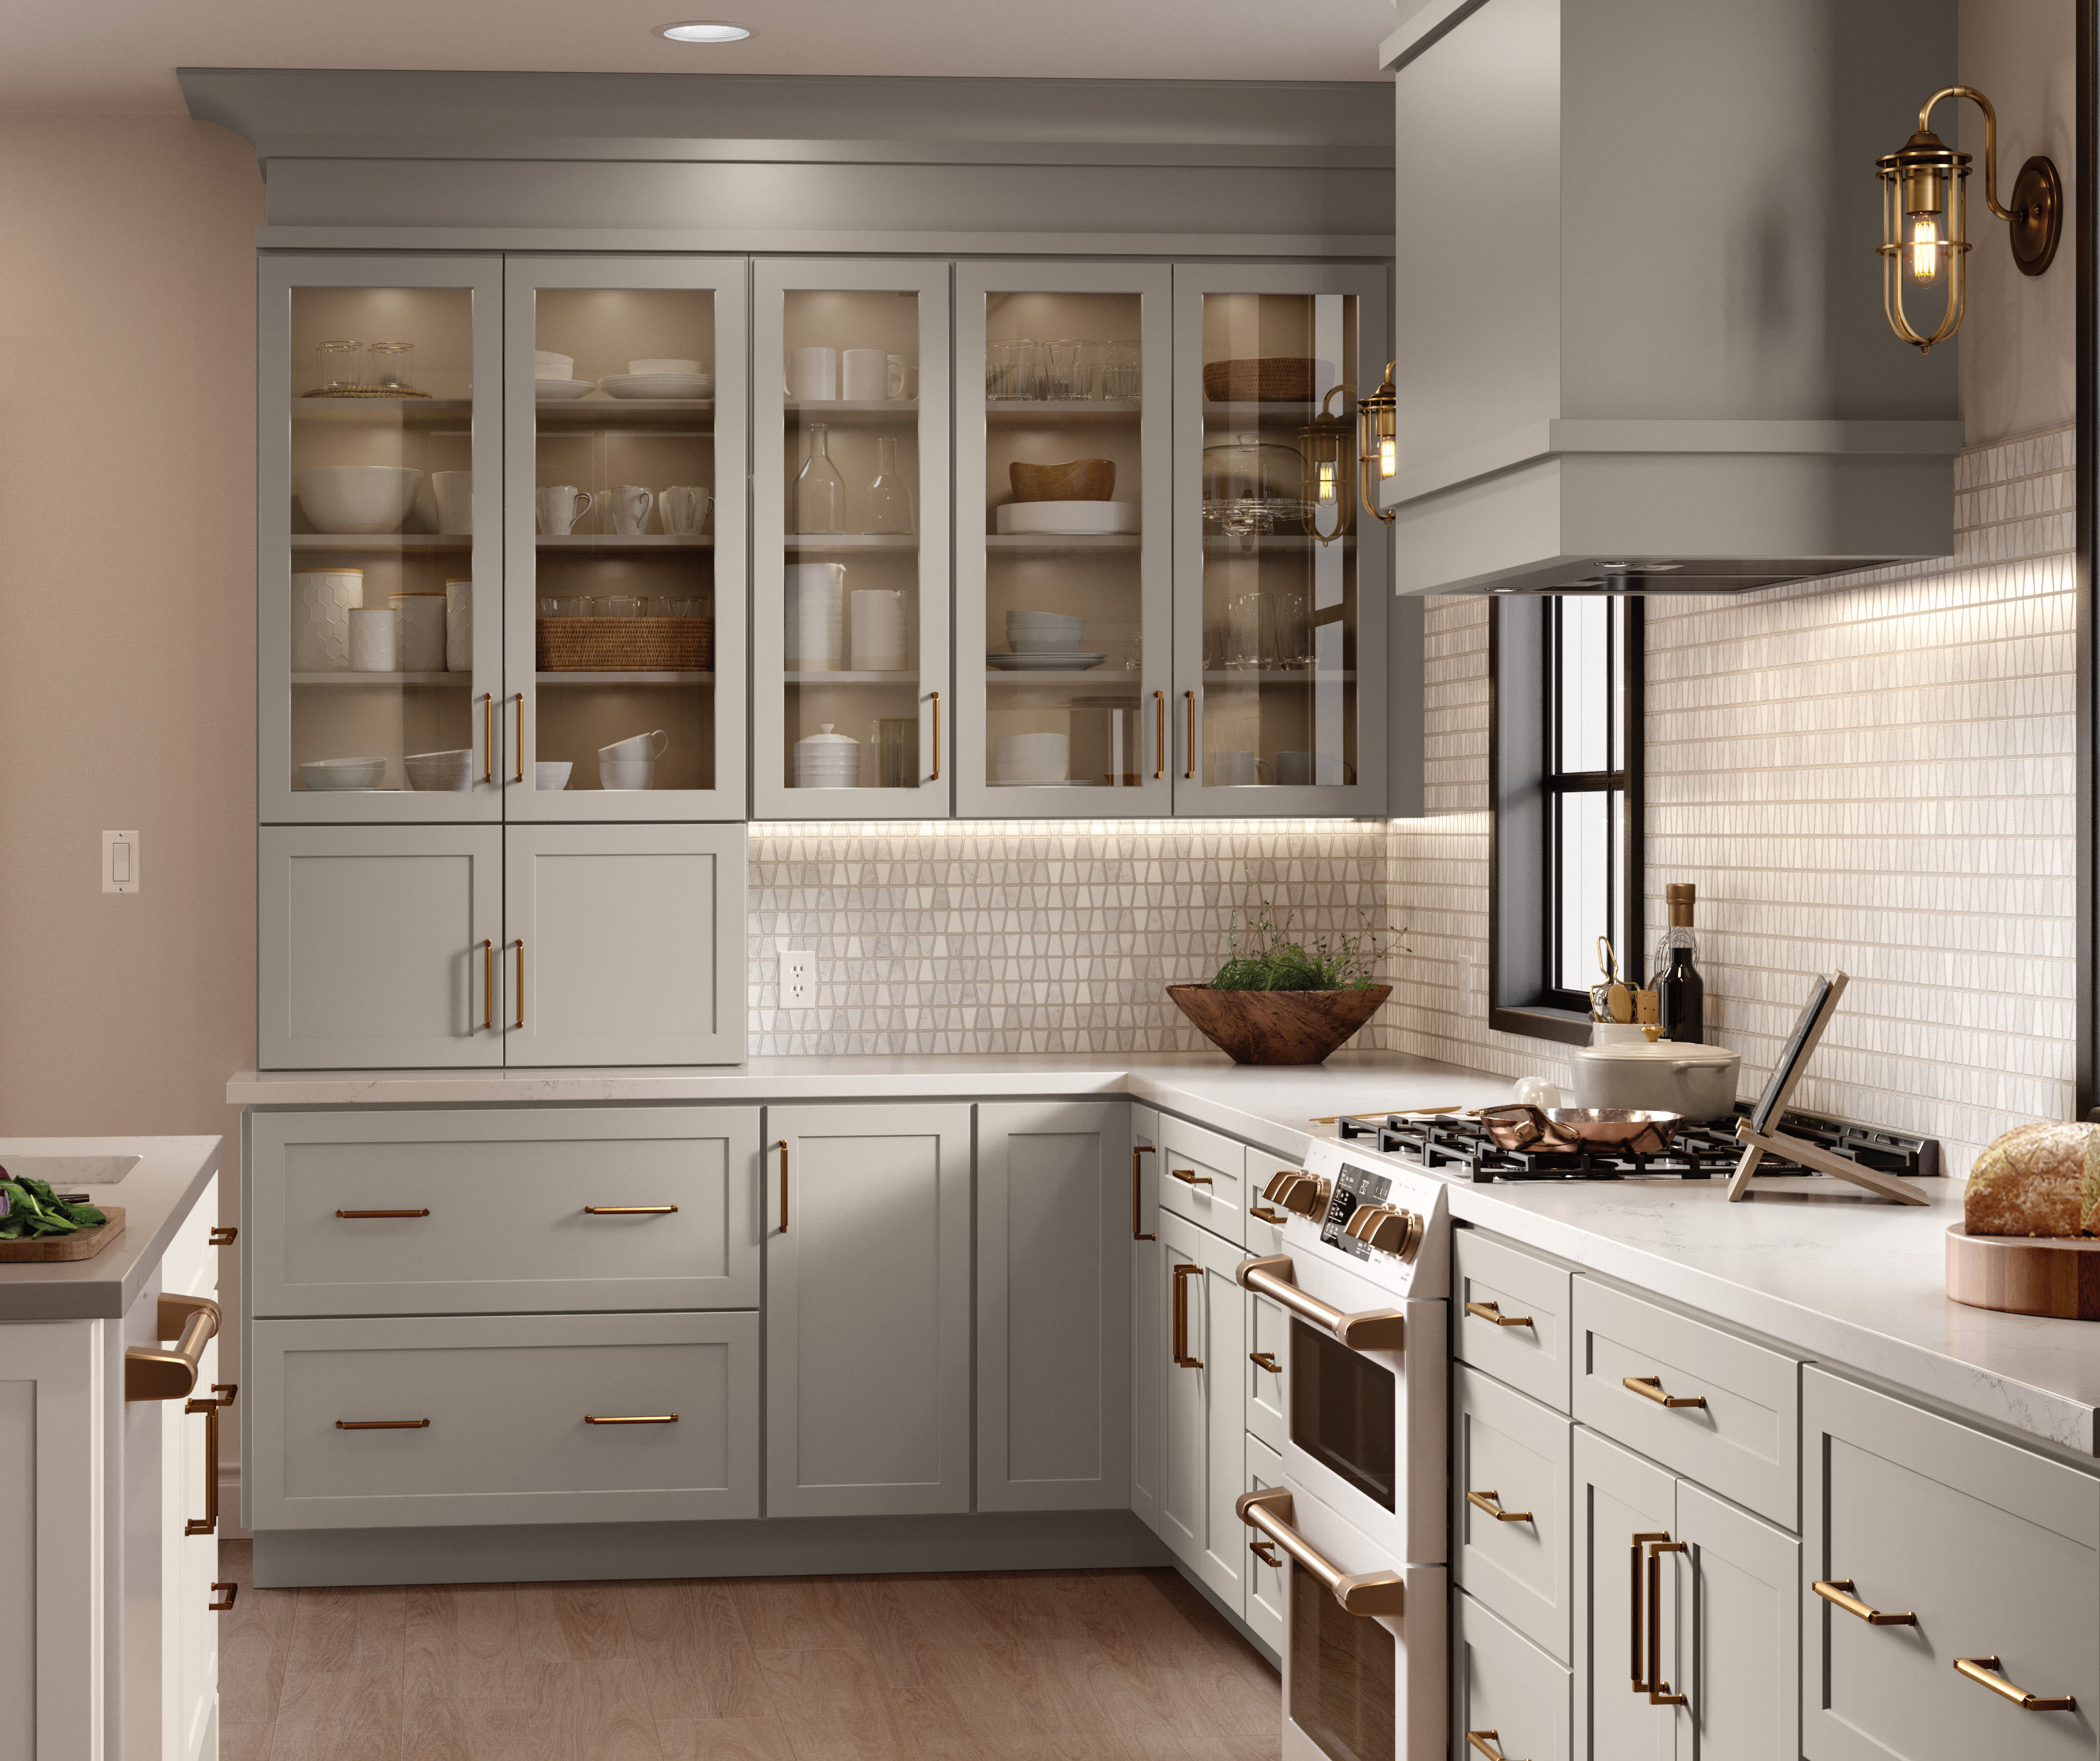 Jamestown Painted White and Grey Kitchen